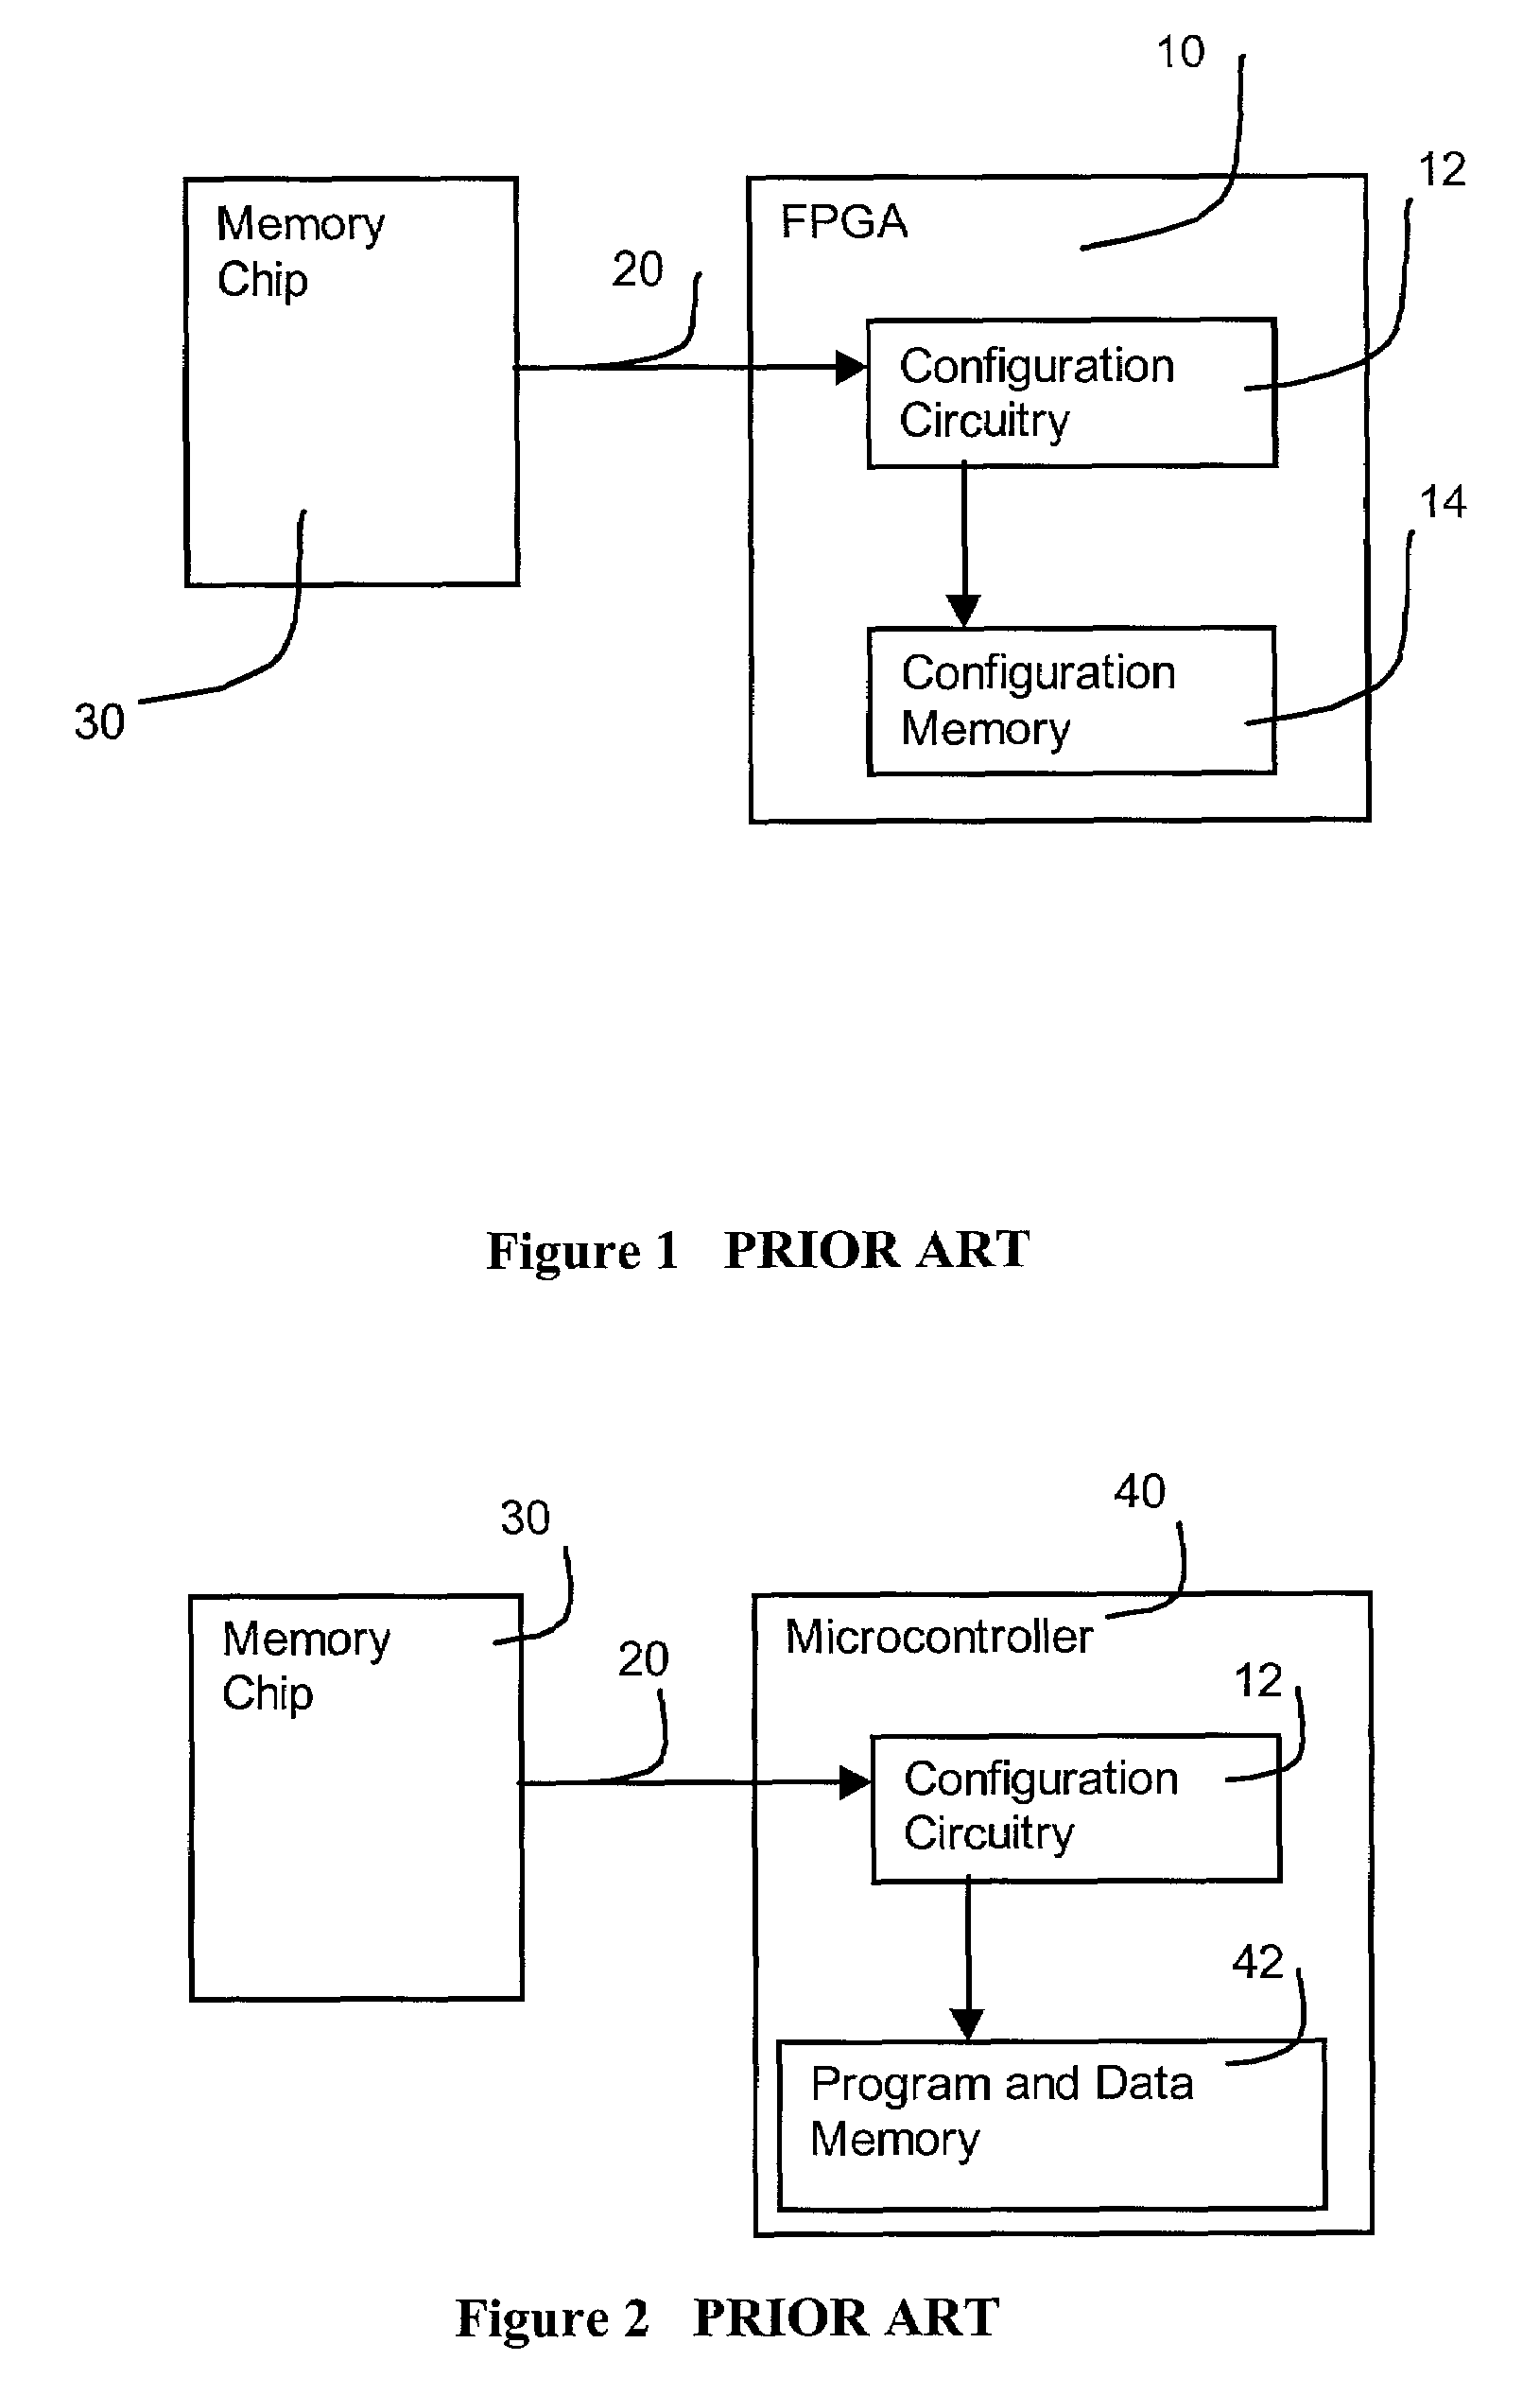 Method of using a mask programmed key to securely configure a field programmable gate array